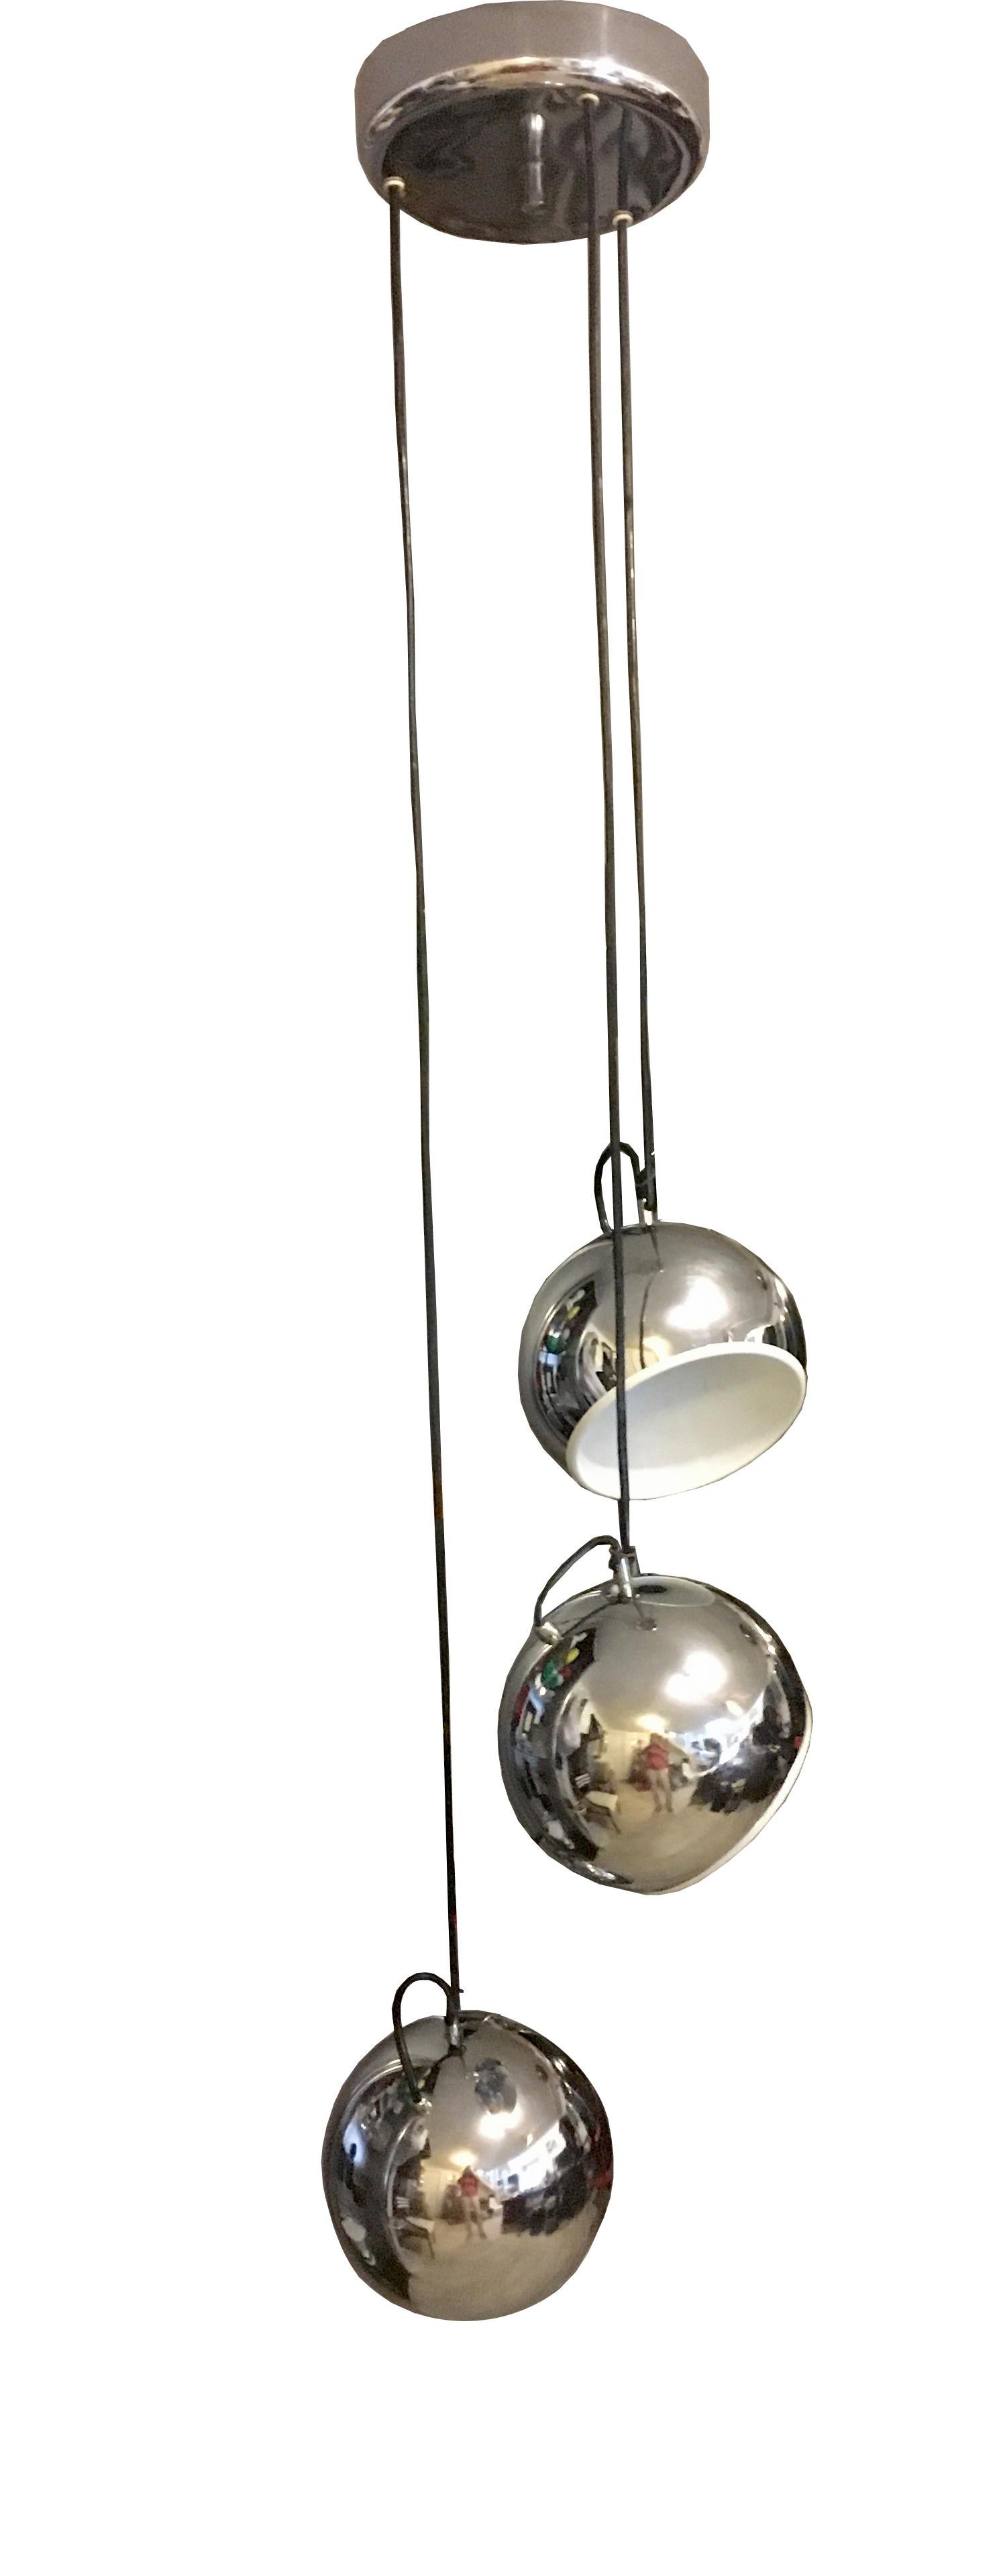 Large chandelier by Italian designer Reggiani with 3 chrome pendants each reflector moves.